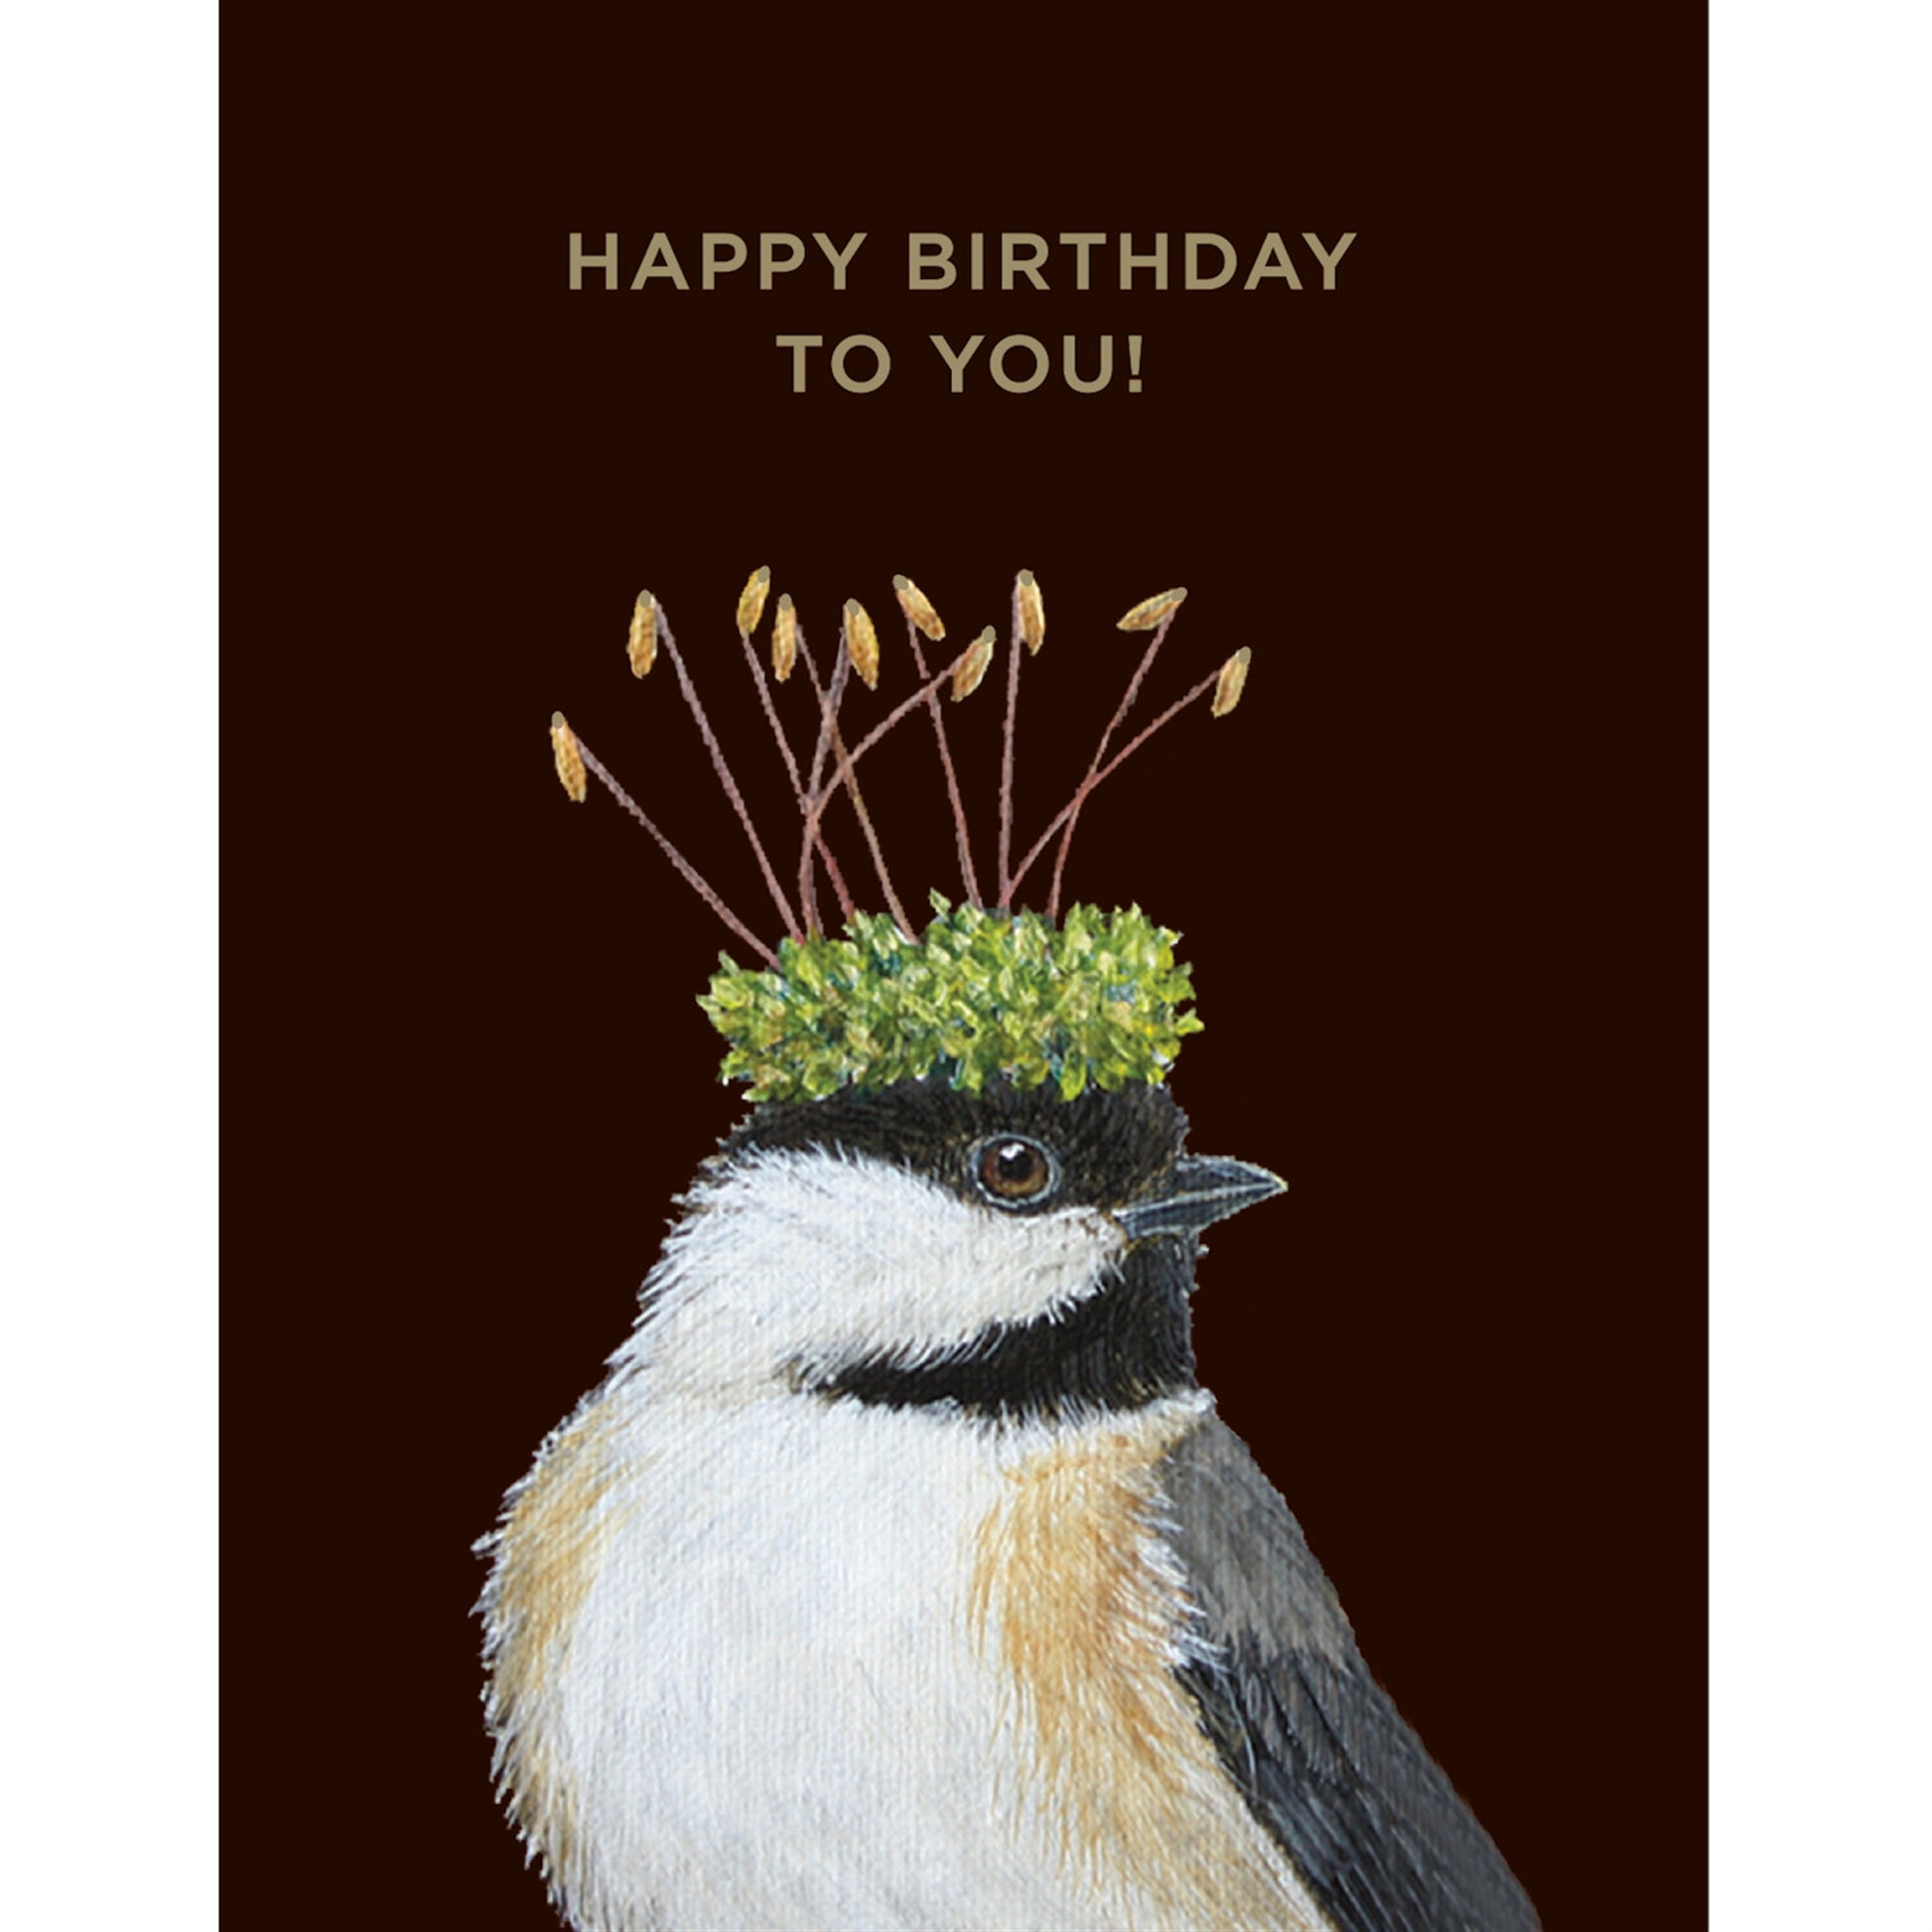 Bird with a green head crown with flower spikes coming out of the top message  Happy Birthday 